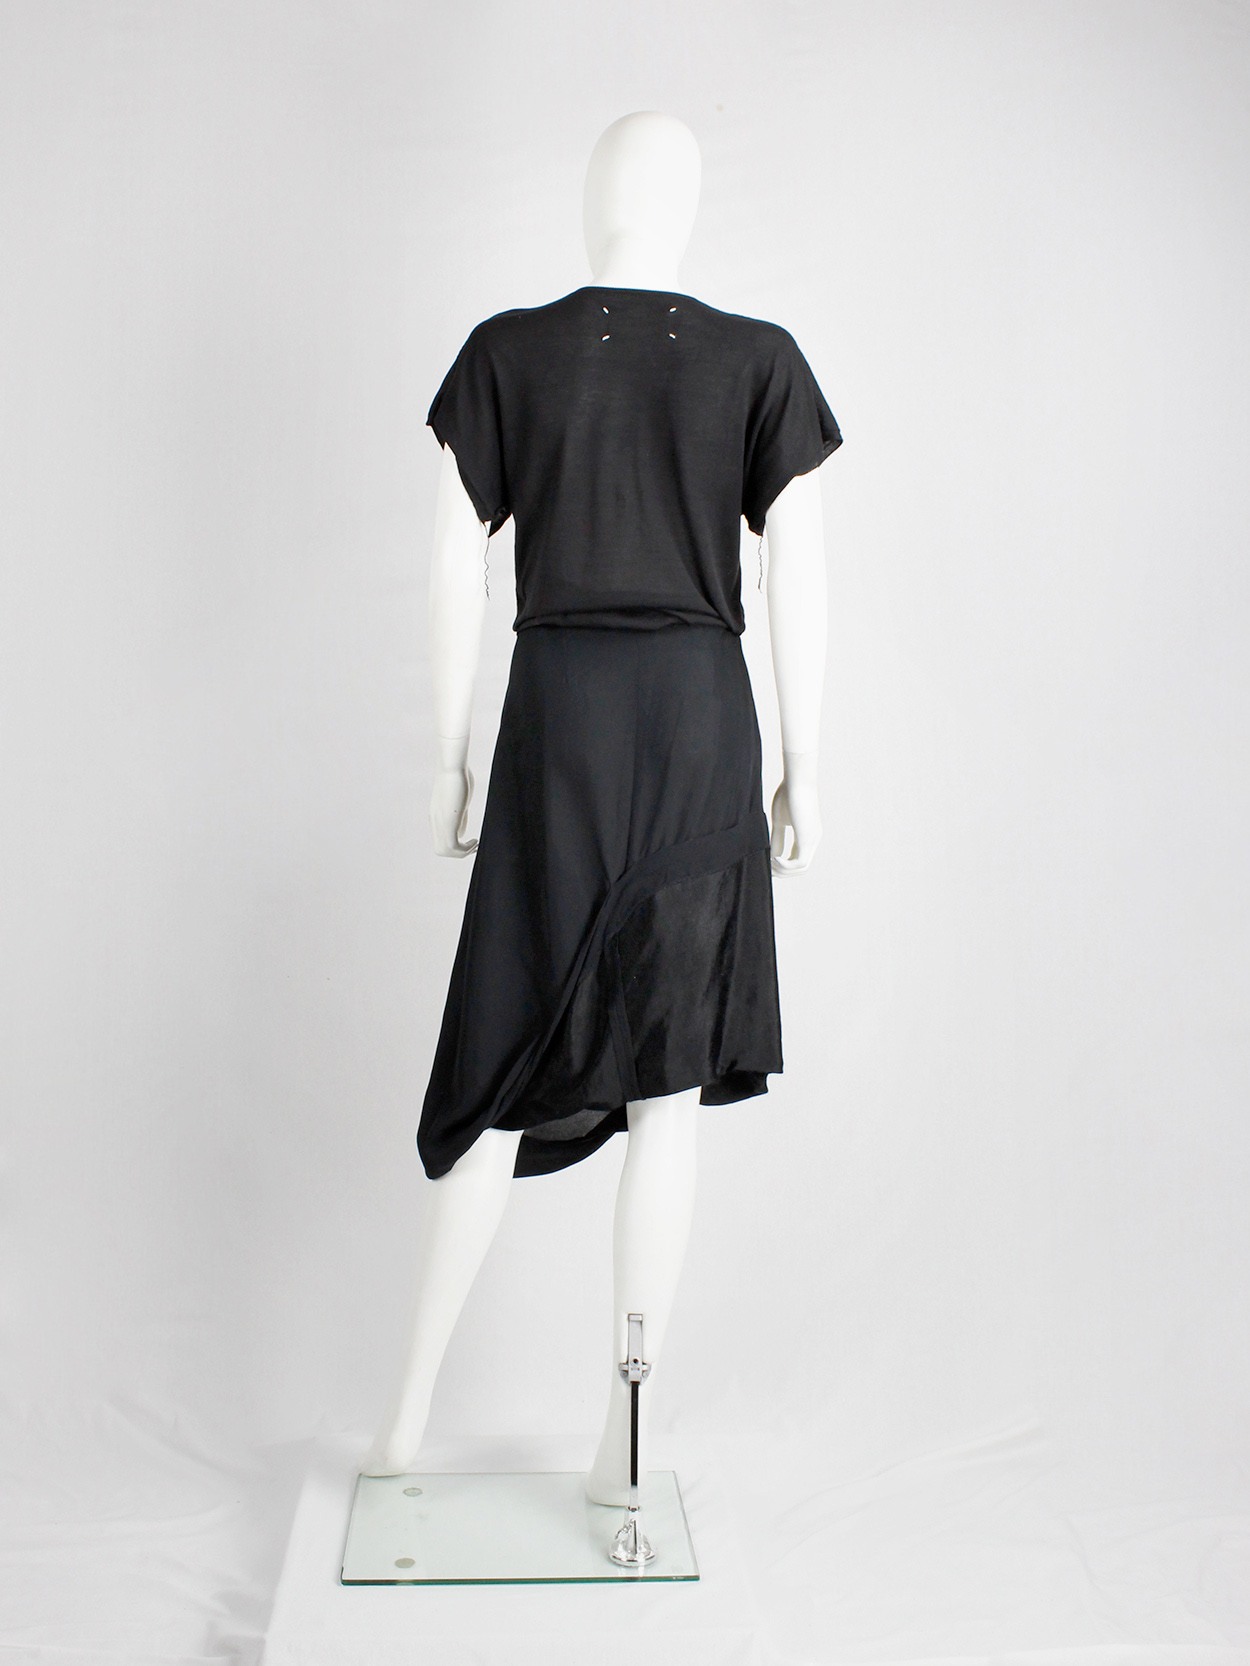 Maison Martin Margiela black partly lifted skirt with exposed lining ...